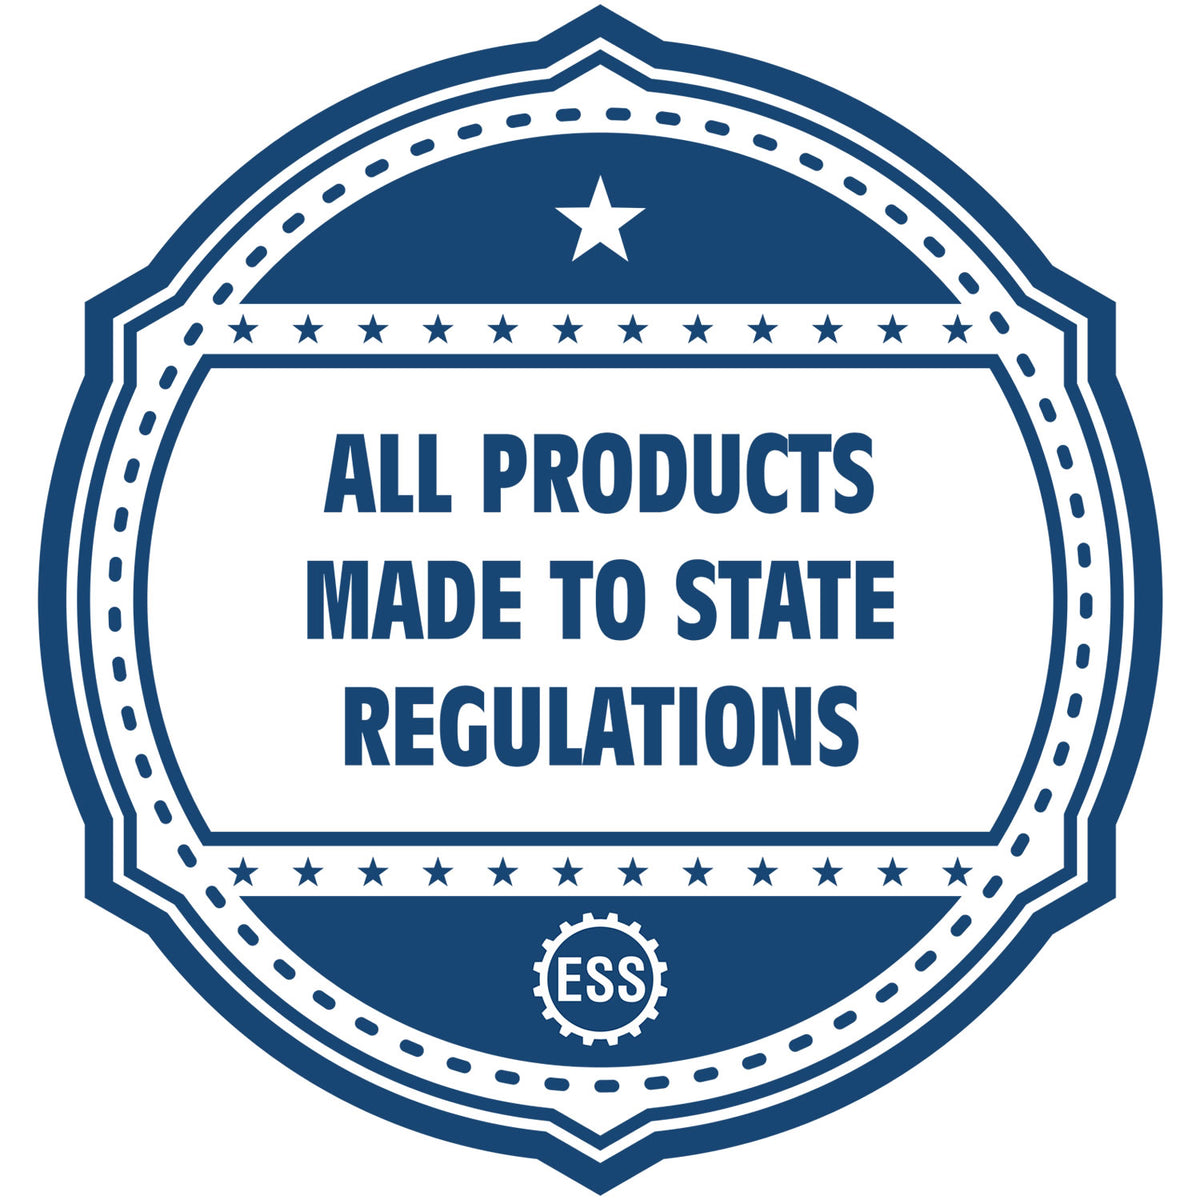 A blue icon or badge for the Heavy Duty Cast Iron Arkansas Geologist Seal Embosser showing that this product is made in compliance with state regulations.